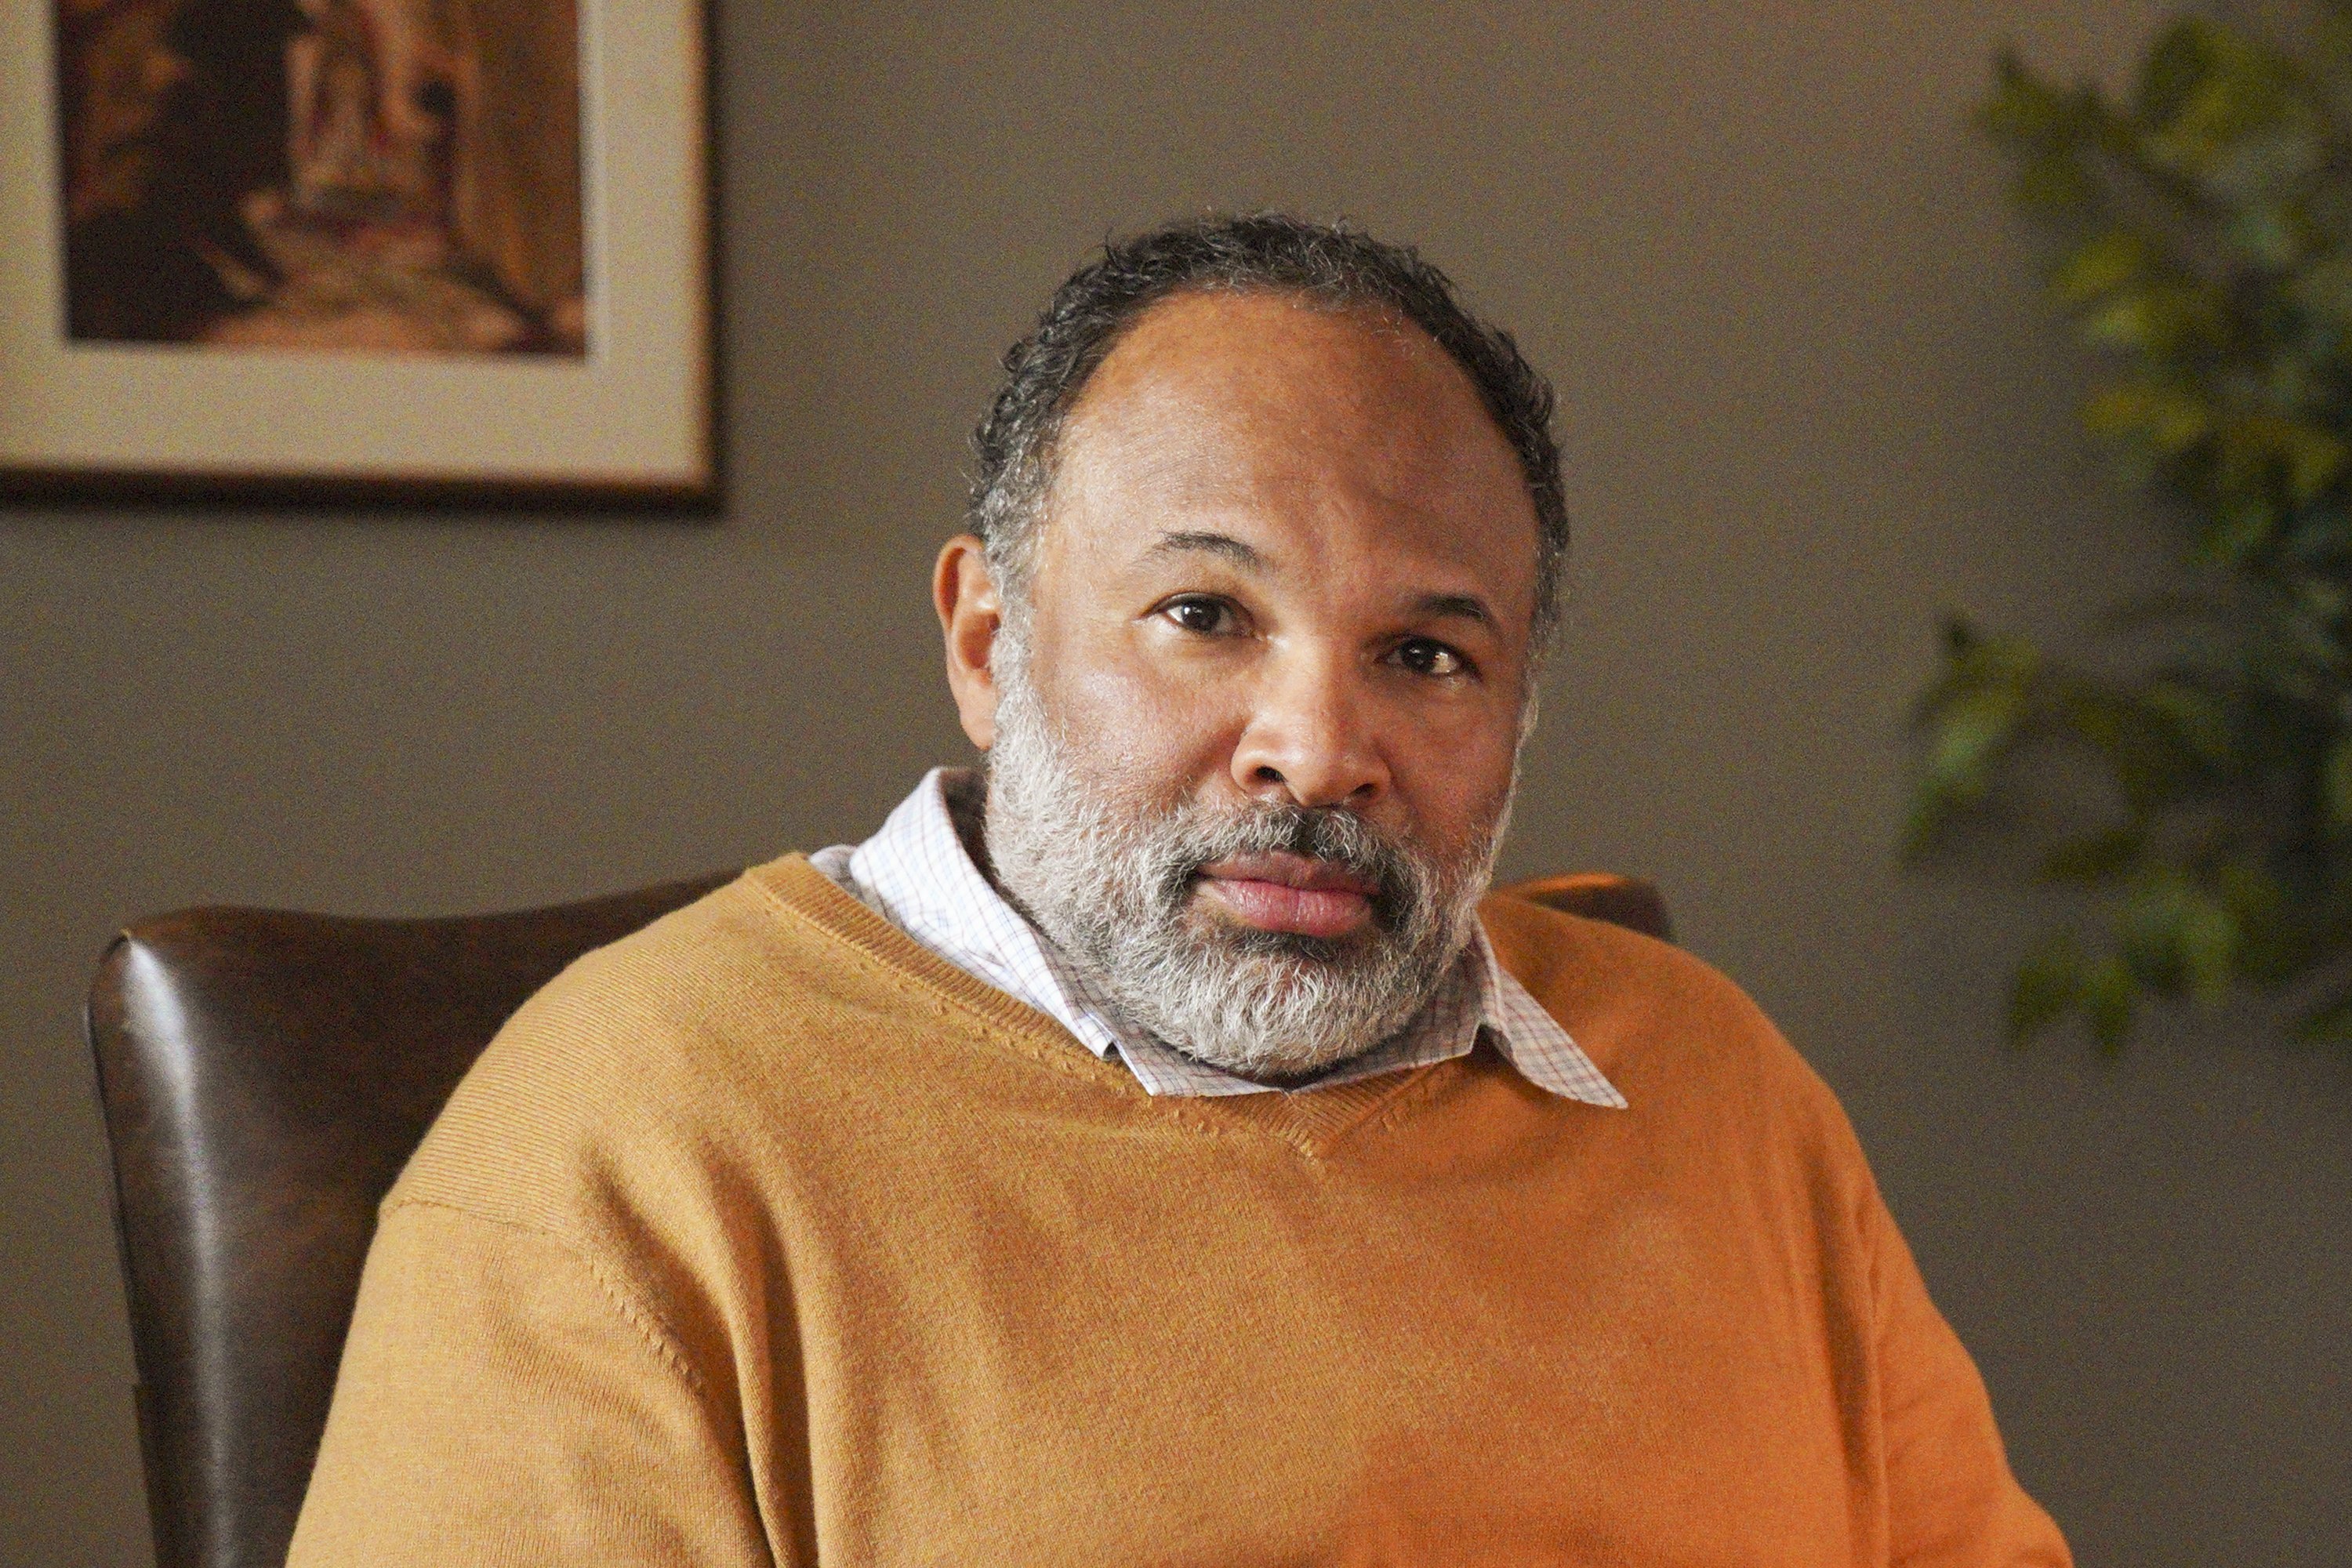 Geoffrey Owens as Pastor Paul on "Bless this Mess," February 07, 2020 | Photo: Getty Images